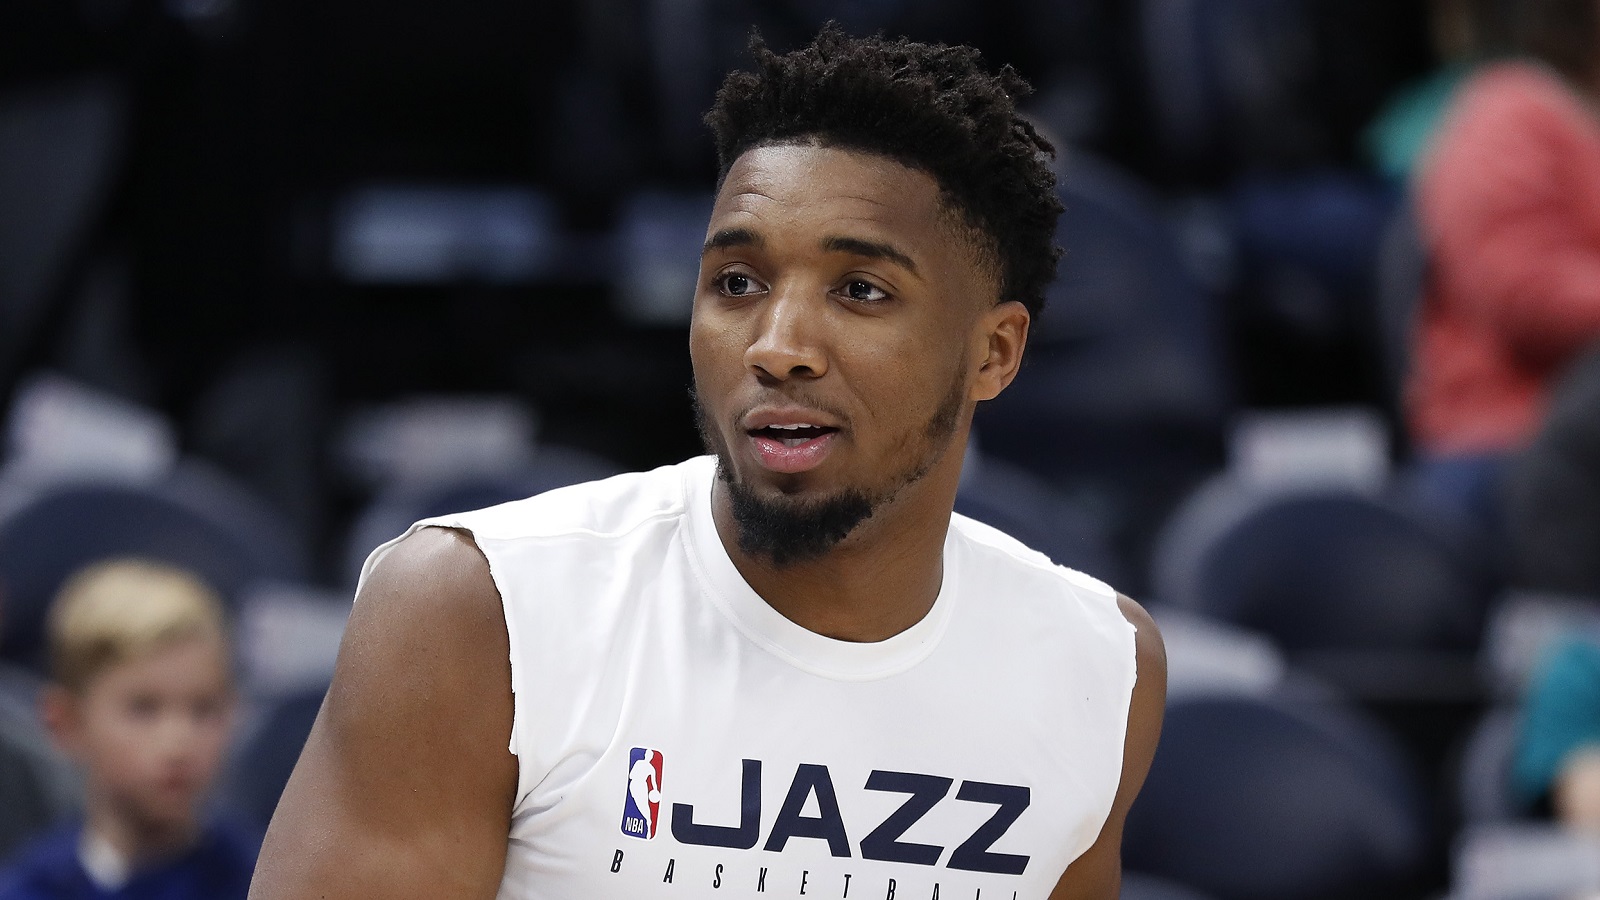 Louisville's Donovan Mitchell to Work Out for Knicks Wednesday